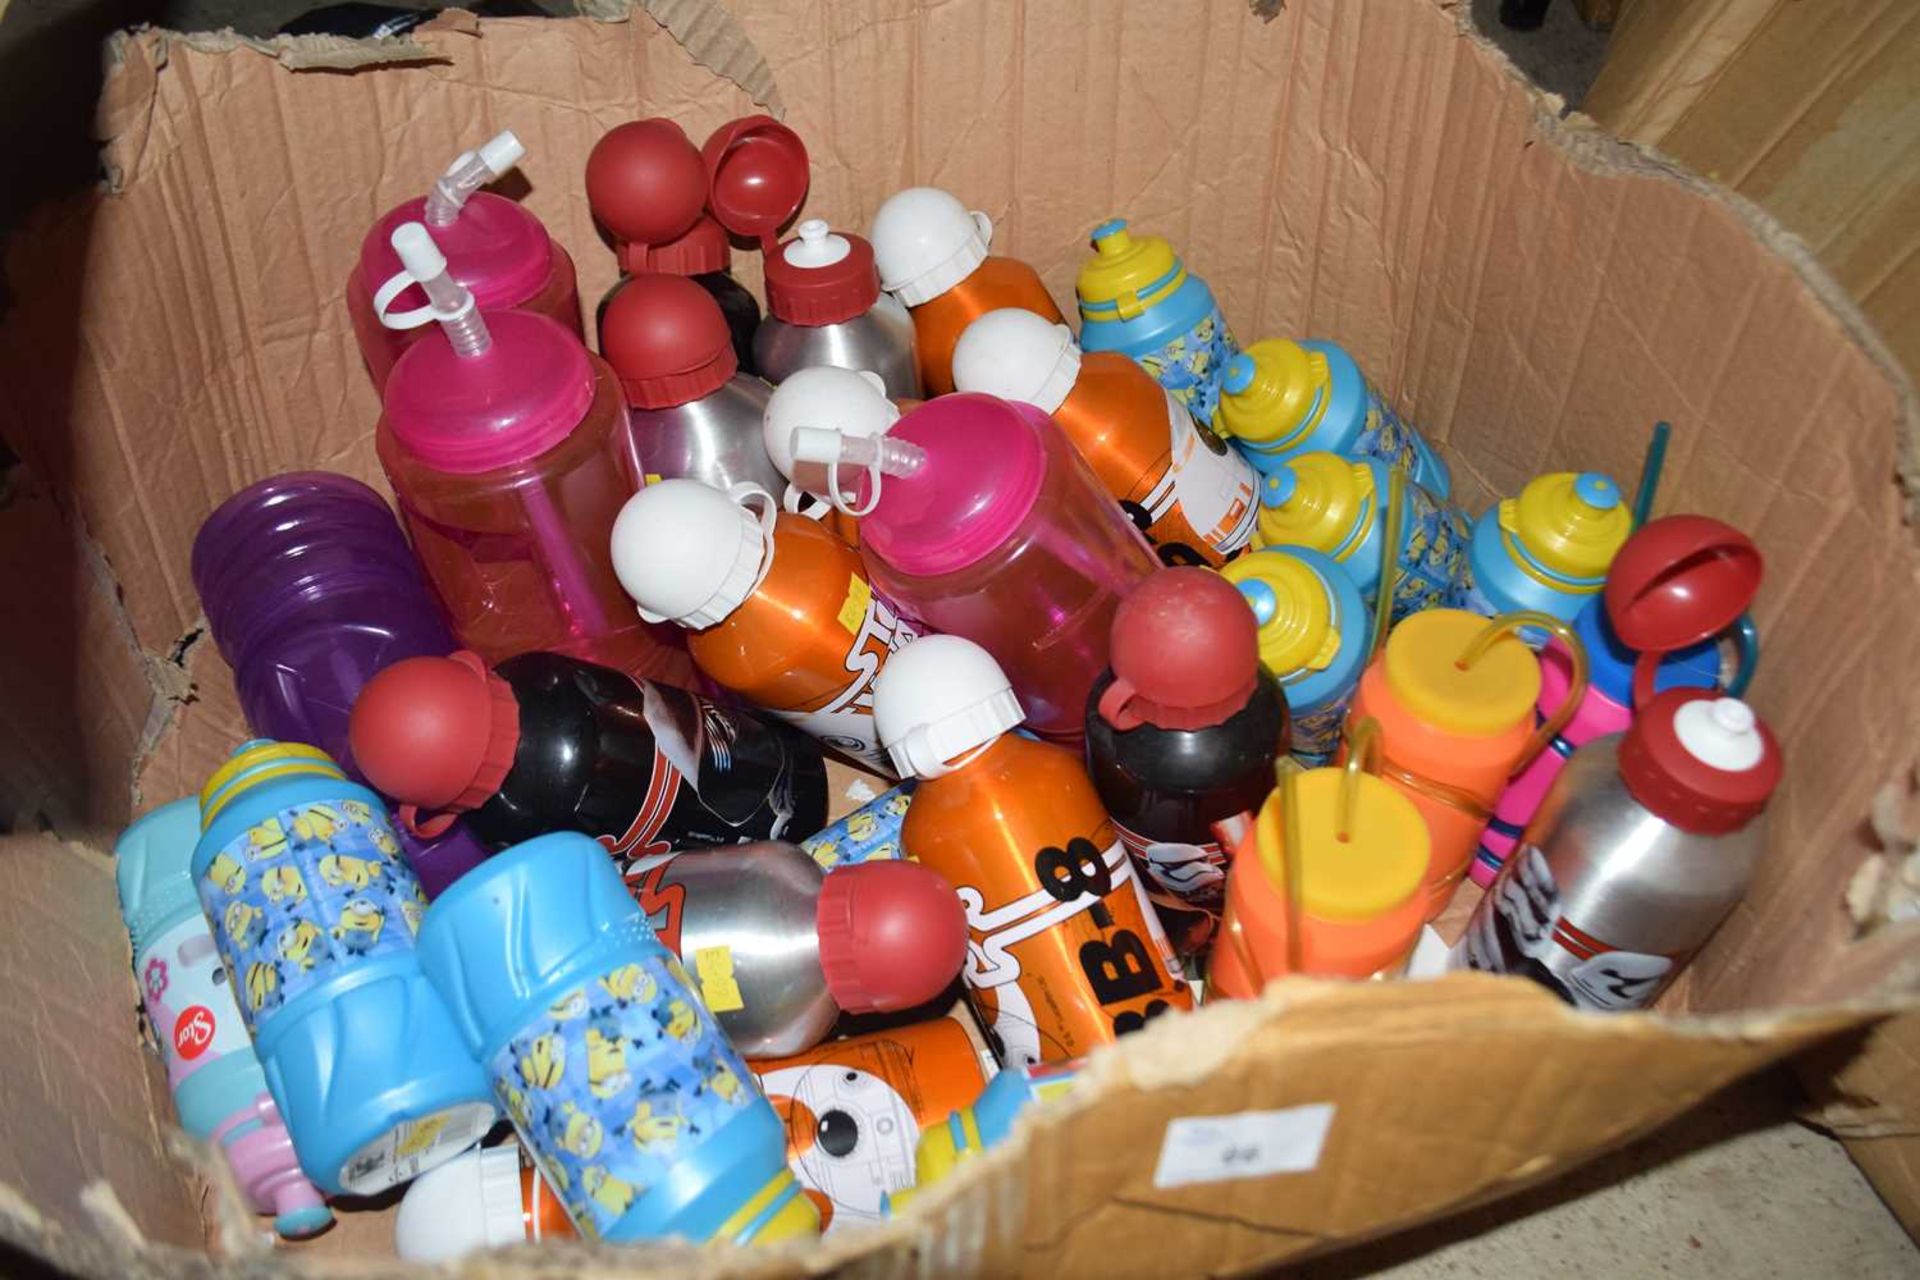 Large box containing a mixture of branded Minions, Star Wars, Paw Patrol bottles etc